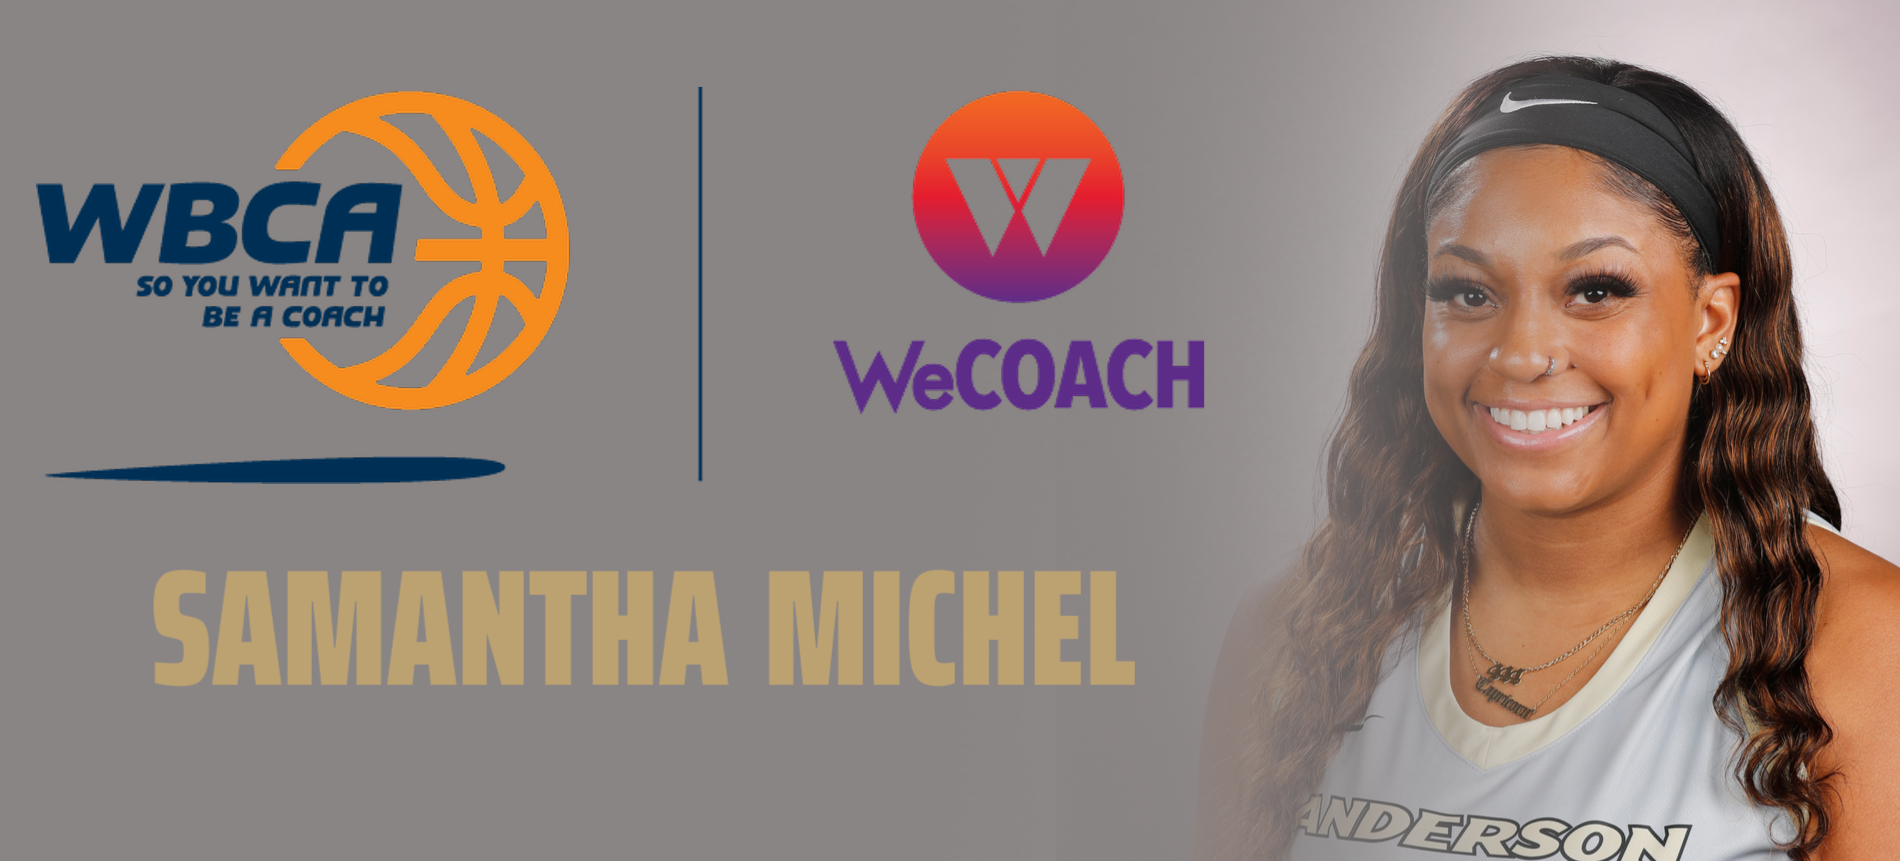 Michel Named to WBCA WeCOACH 2022 "So You Want To Be A Coach" Class